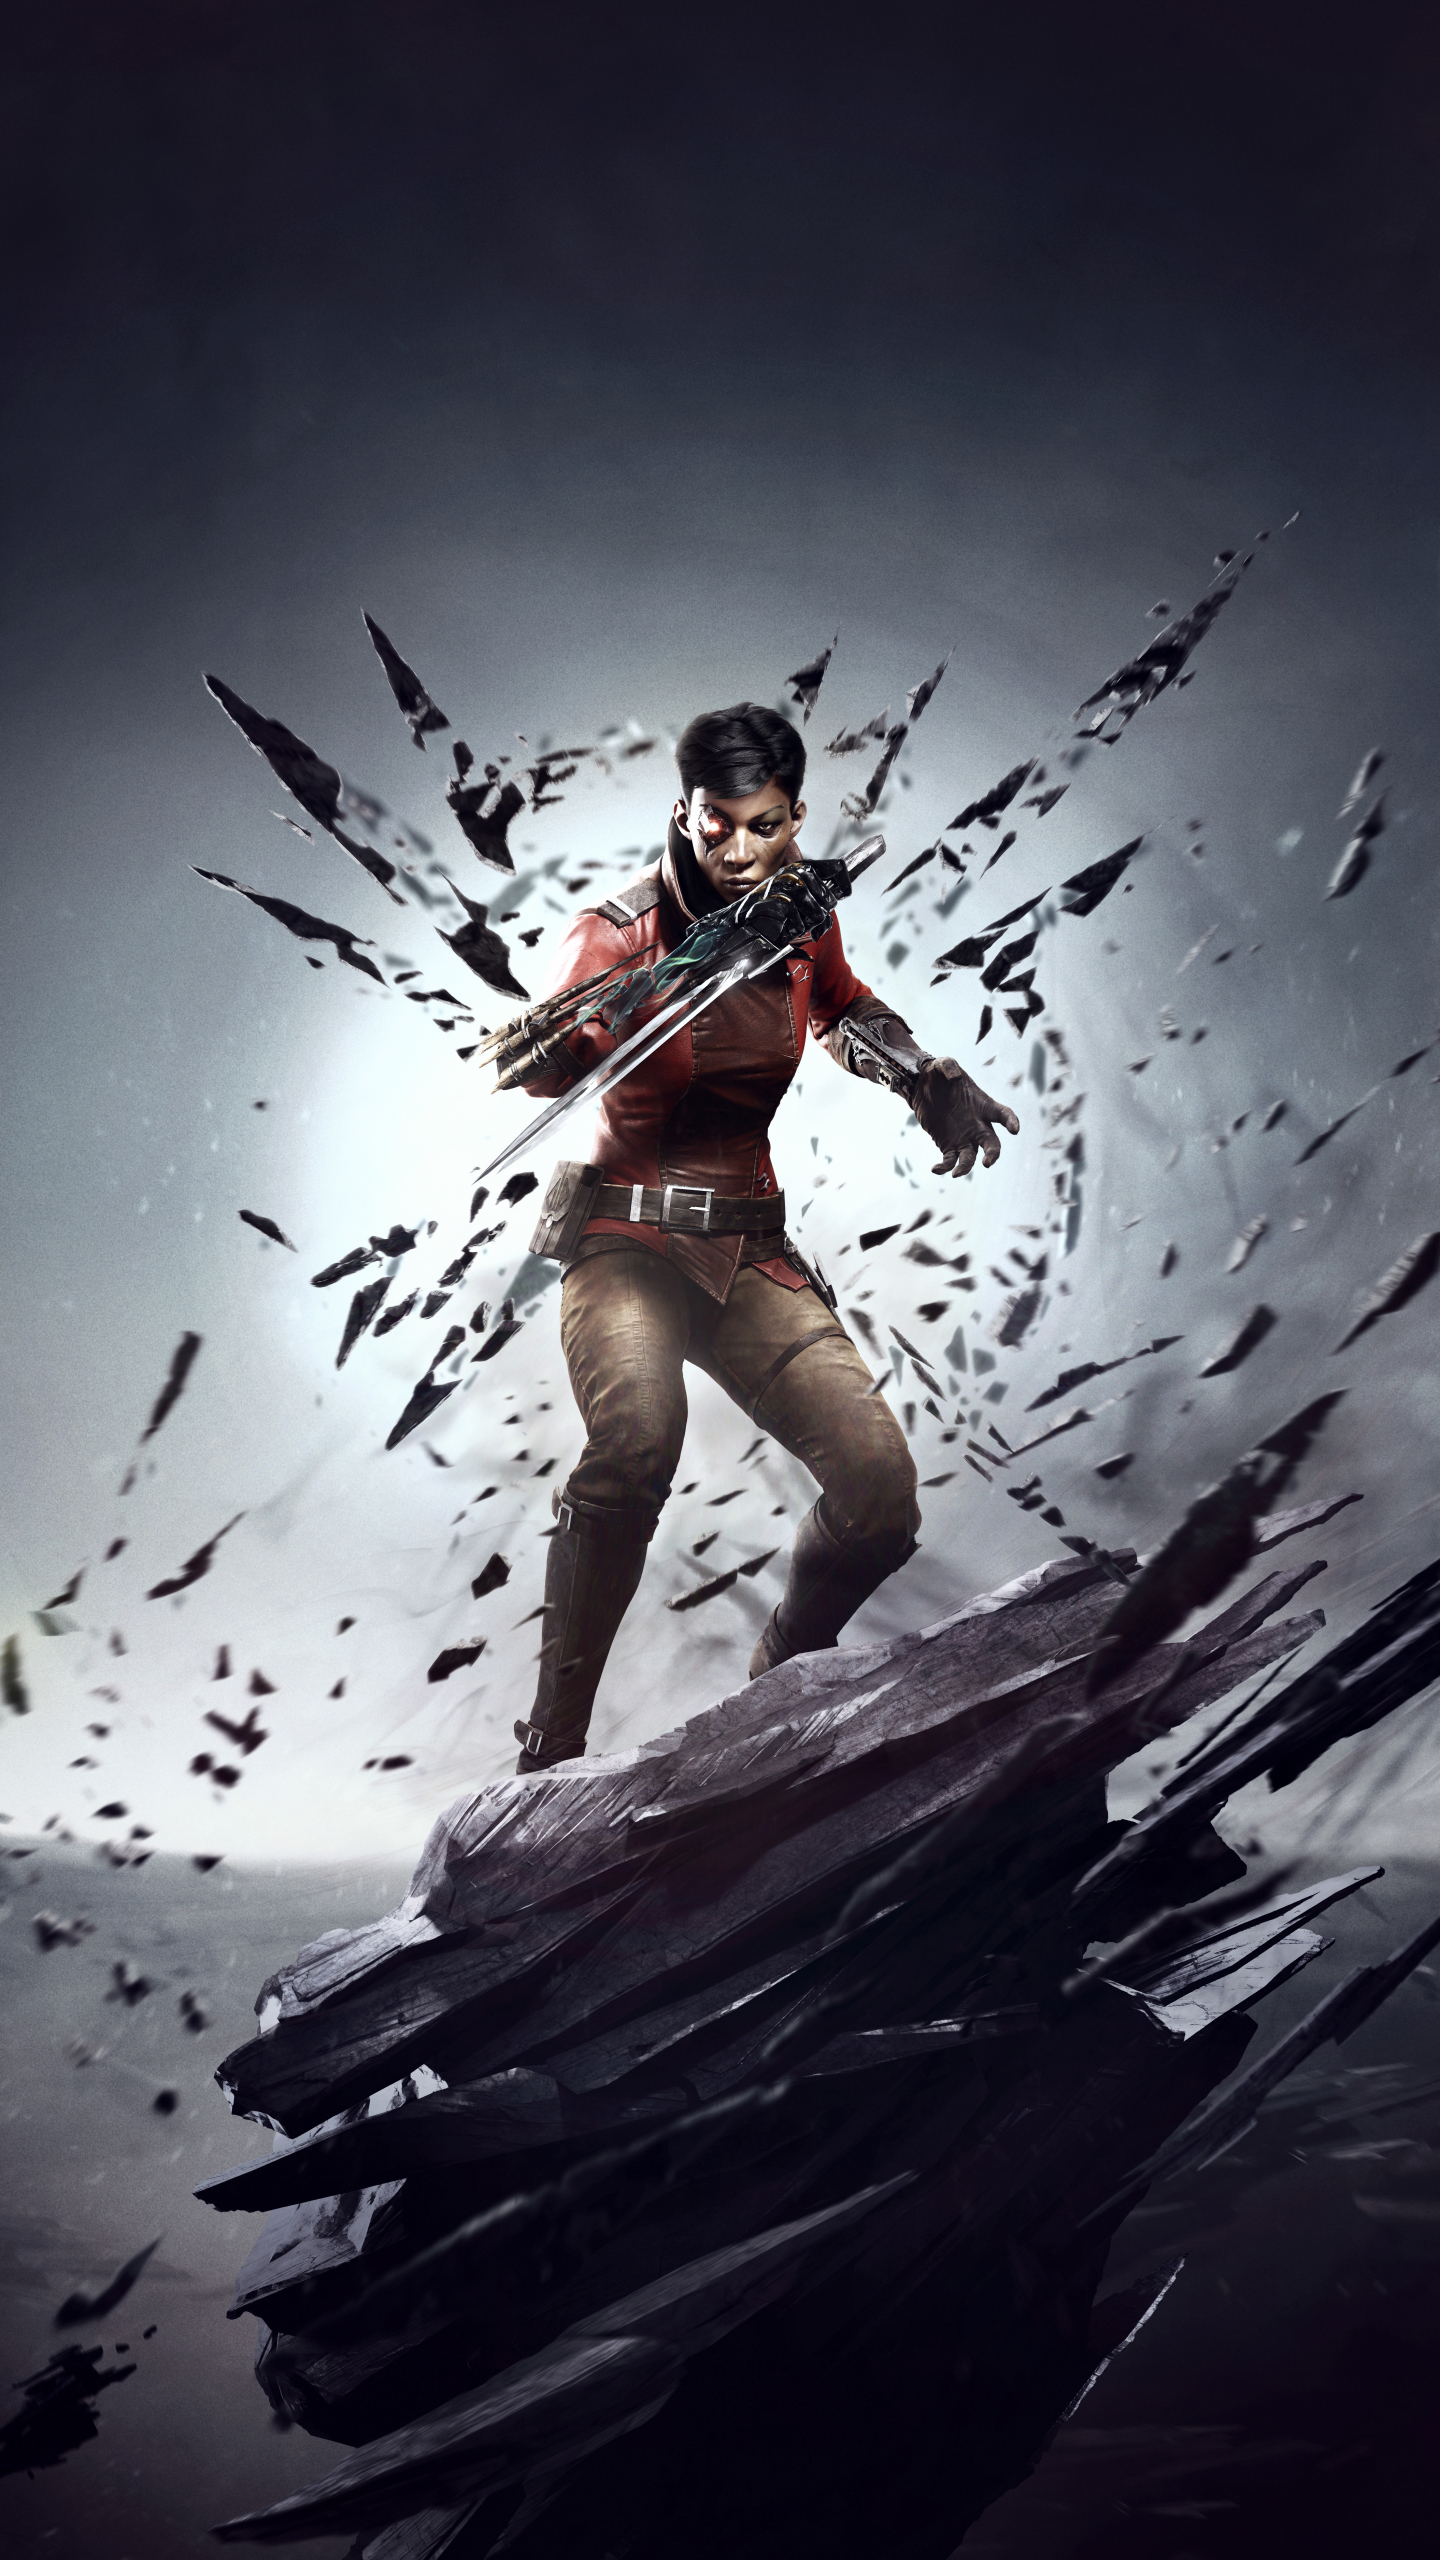 video game, dishonored: death of the outsider, dishonored